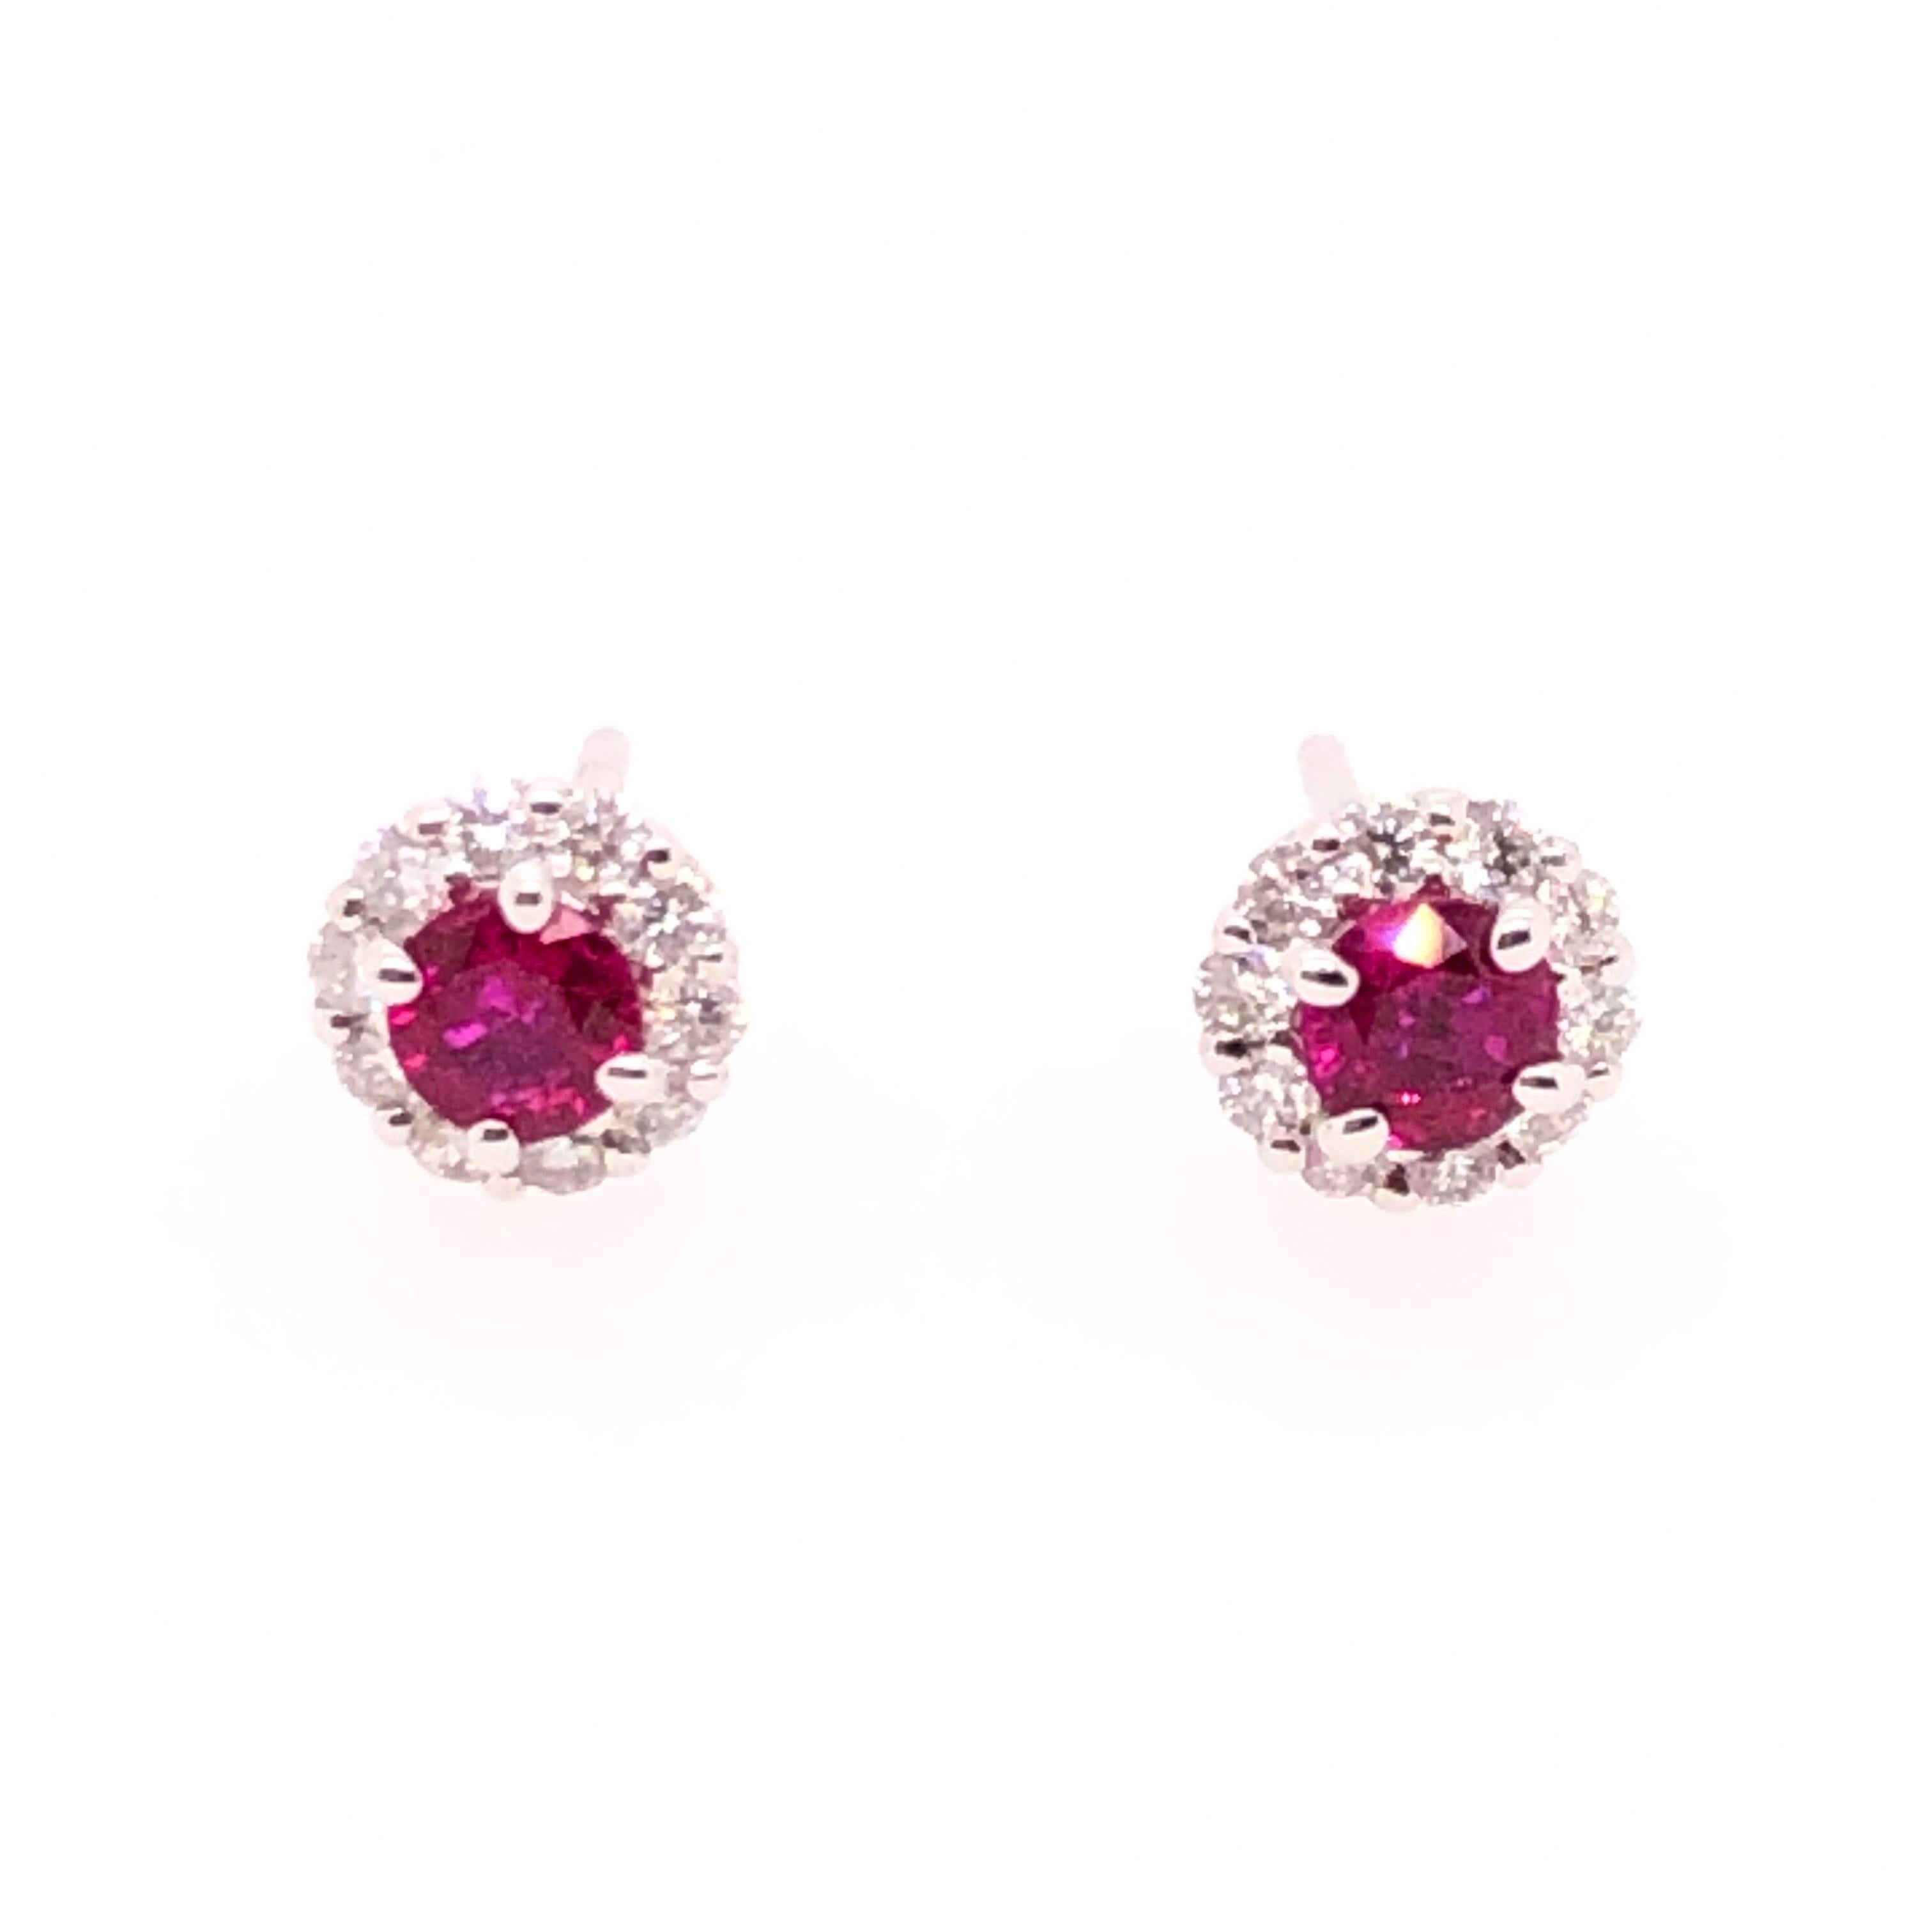 A touch of color in a timeless setting, these beautiful bright rubies nestled in a ring of diamonds are the perfect accent. This classic design is versatile yet elegant, for a timeless feminine. 

This pair of 14K white gold earring studs have a